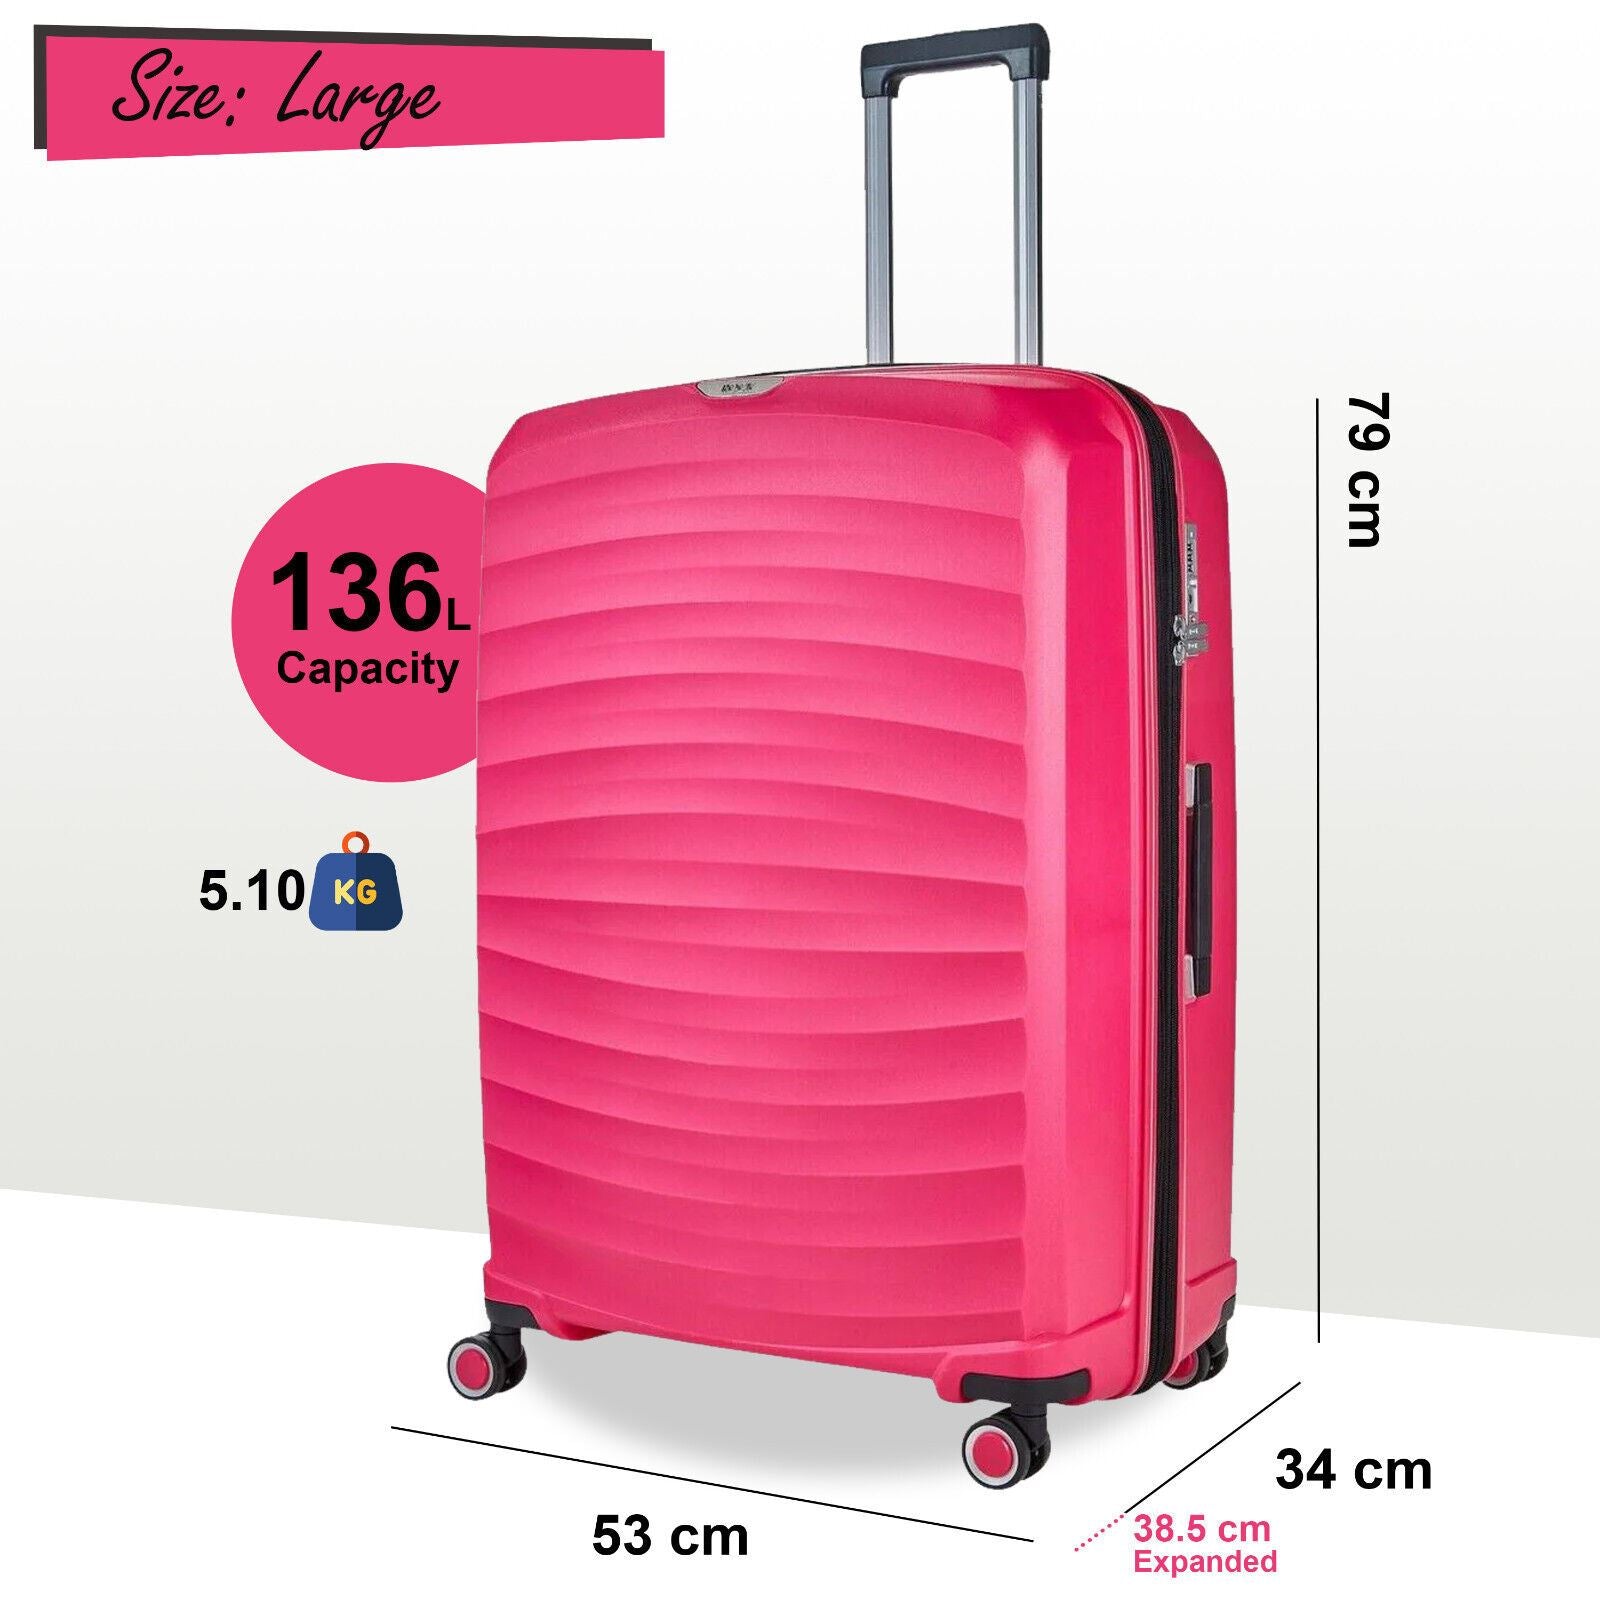 Altoona Large Hard Shell Suitcase in Pink